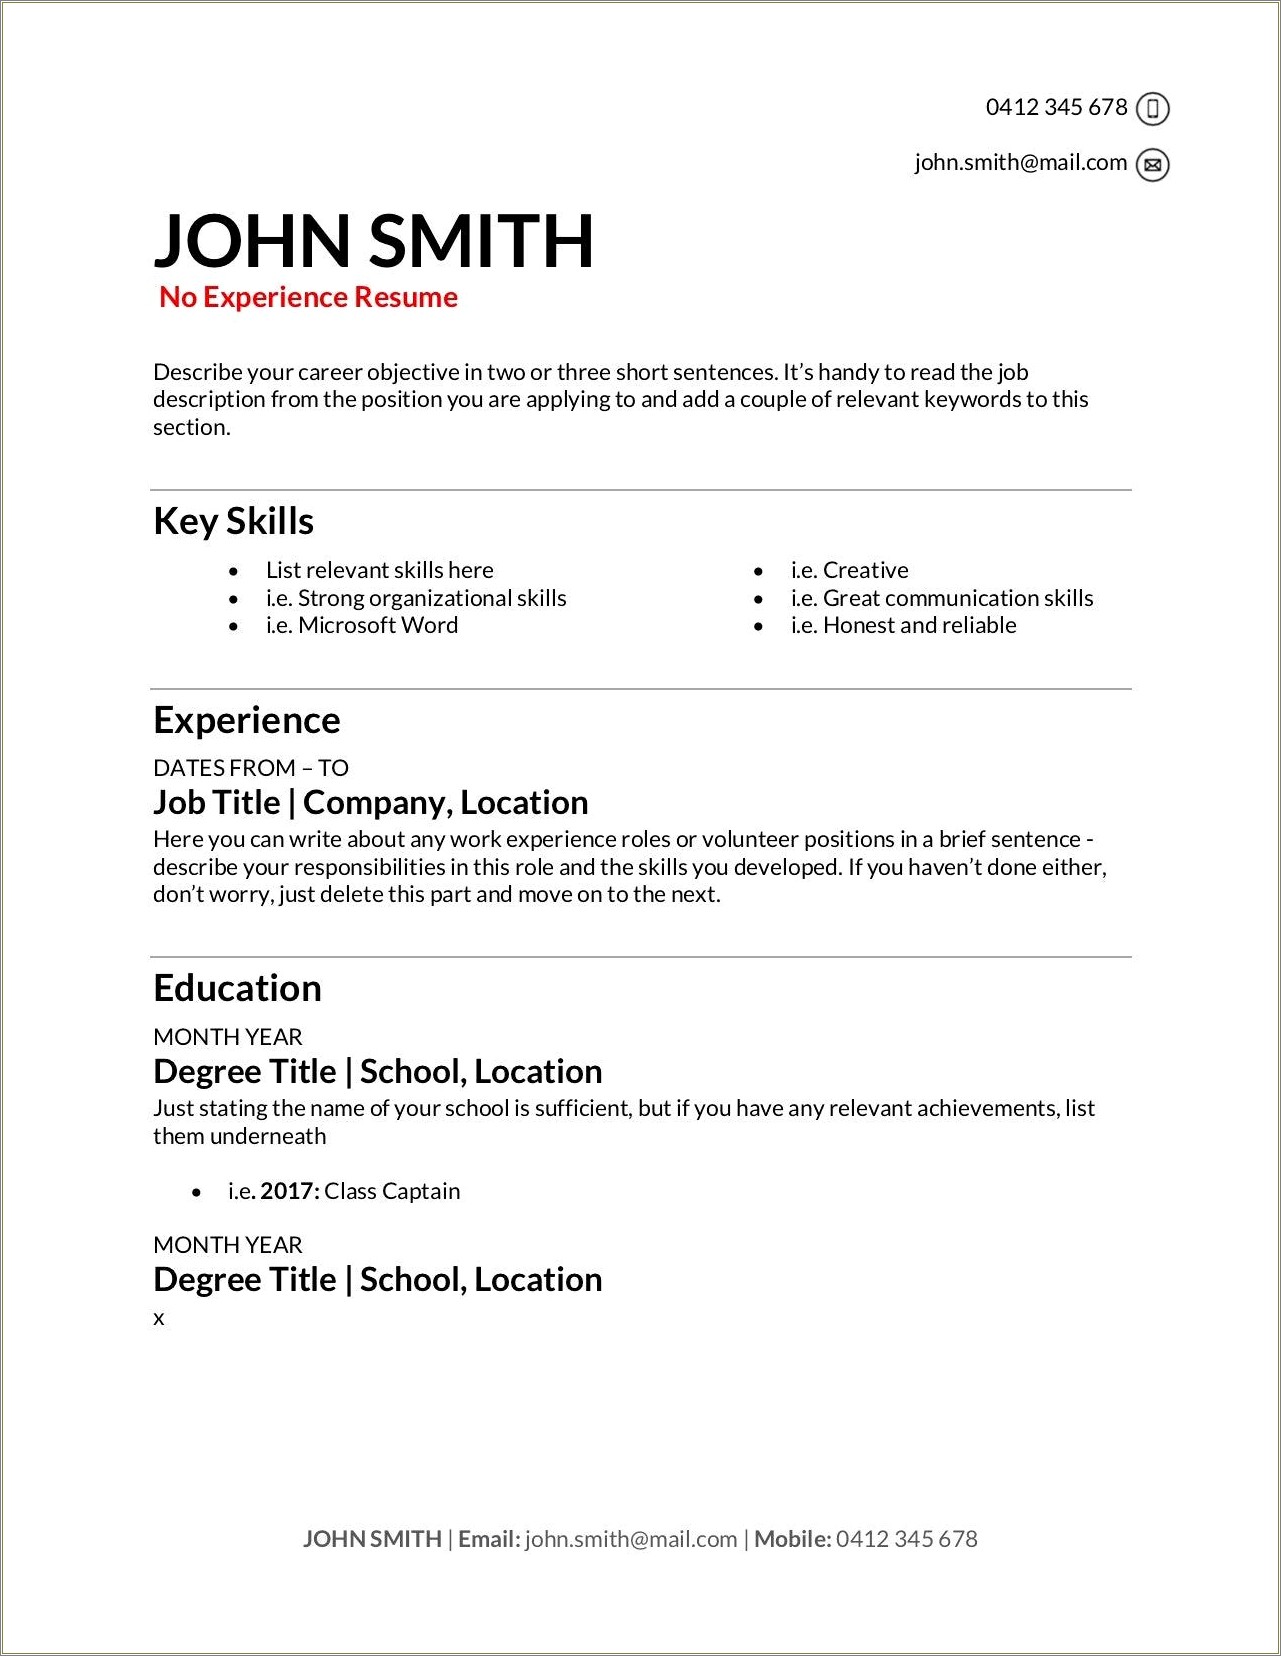 Resume Should I Include Work Experience Date